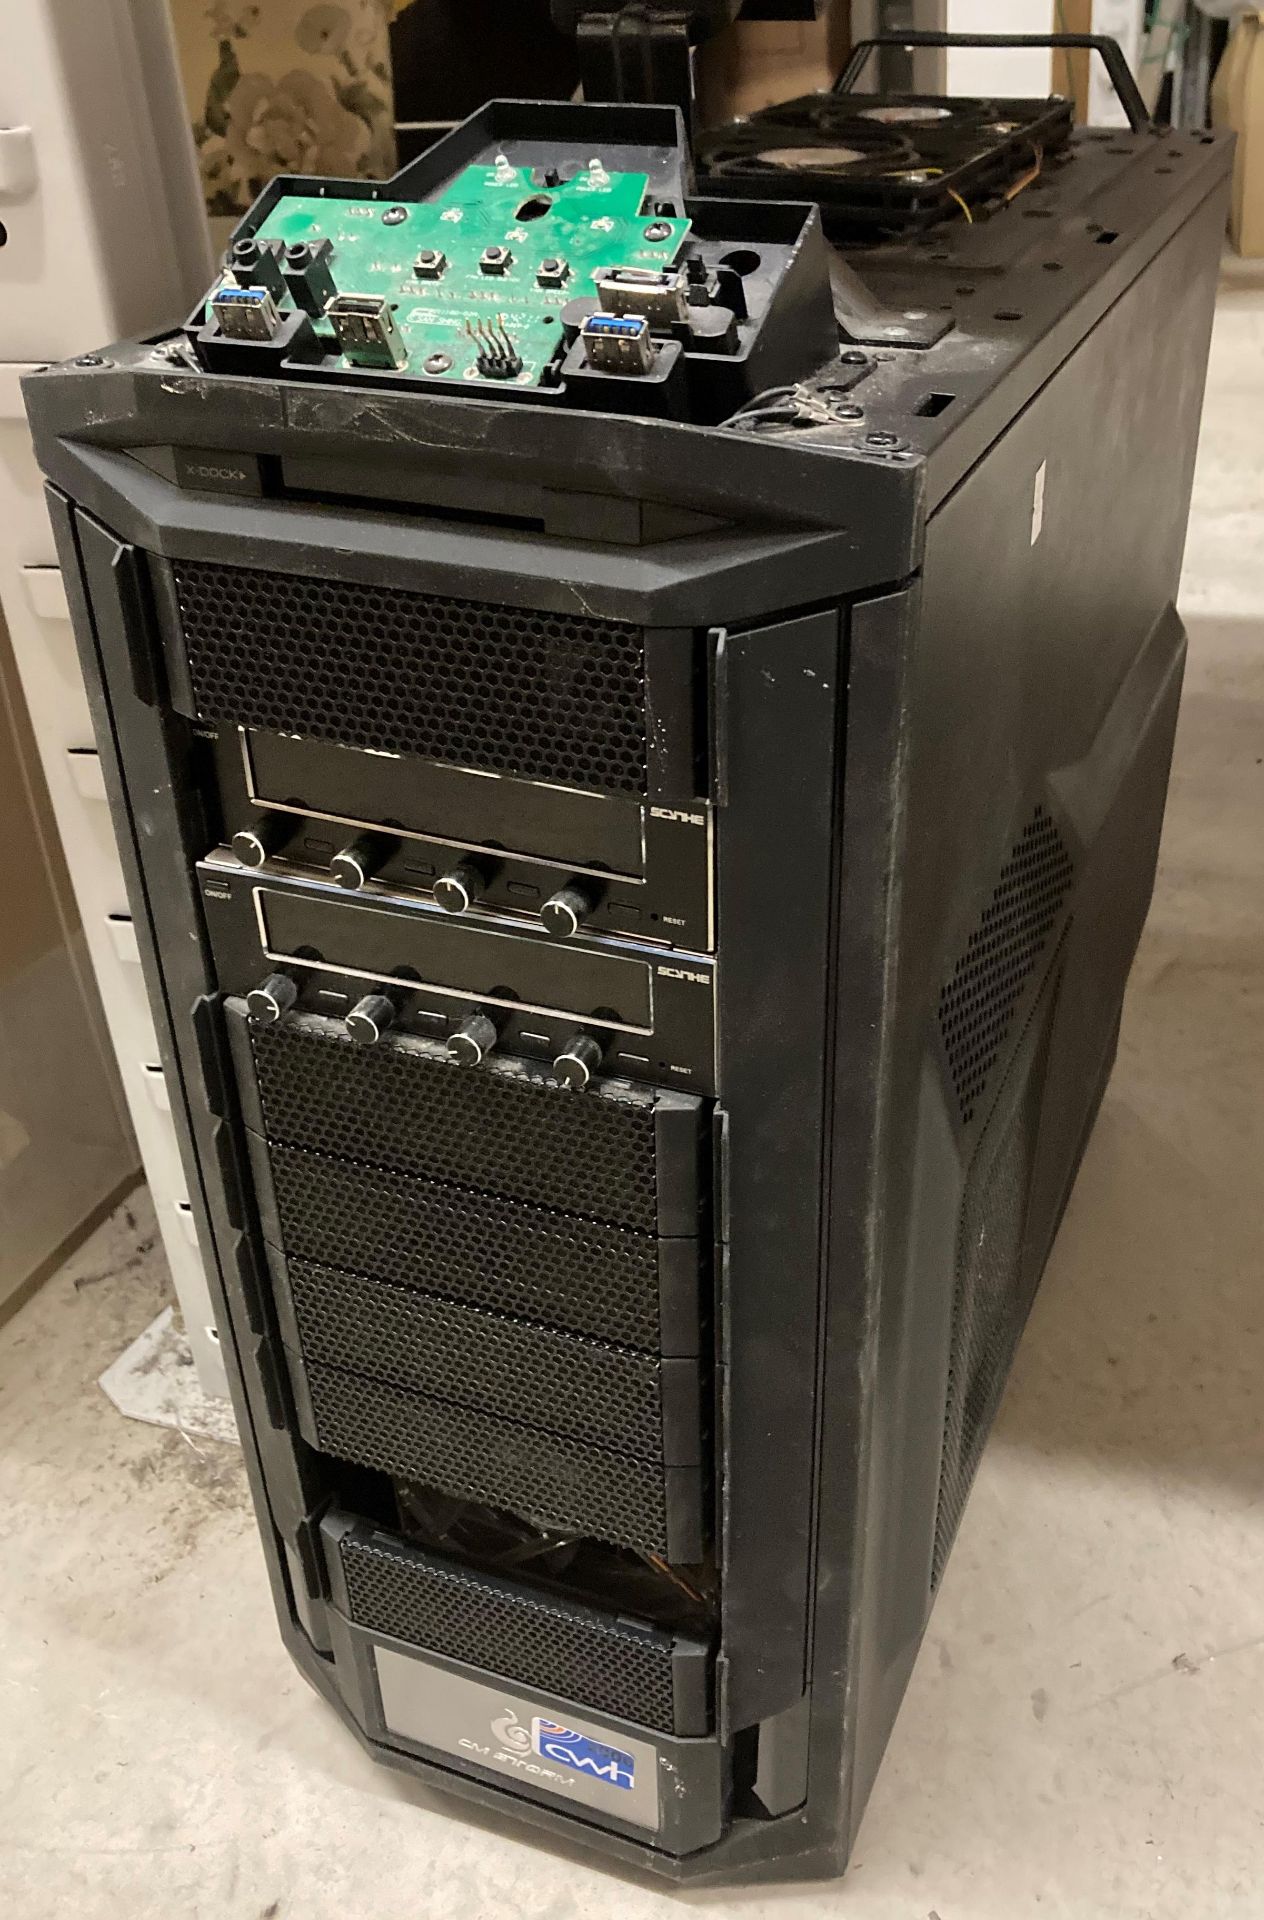 Tower desktop/server 64GB RAM and 2TB Hard Drive complete with Geoforce GTX1080 video card - no